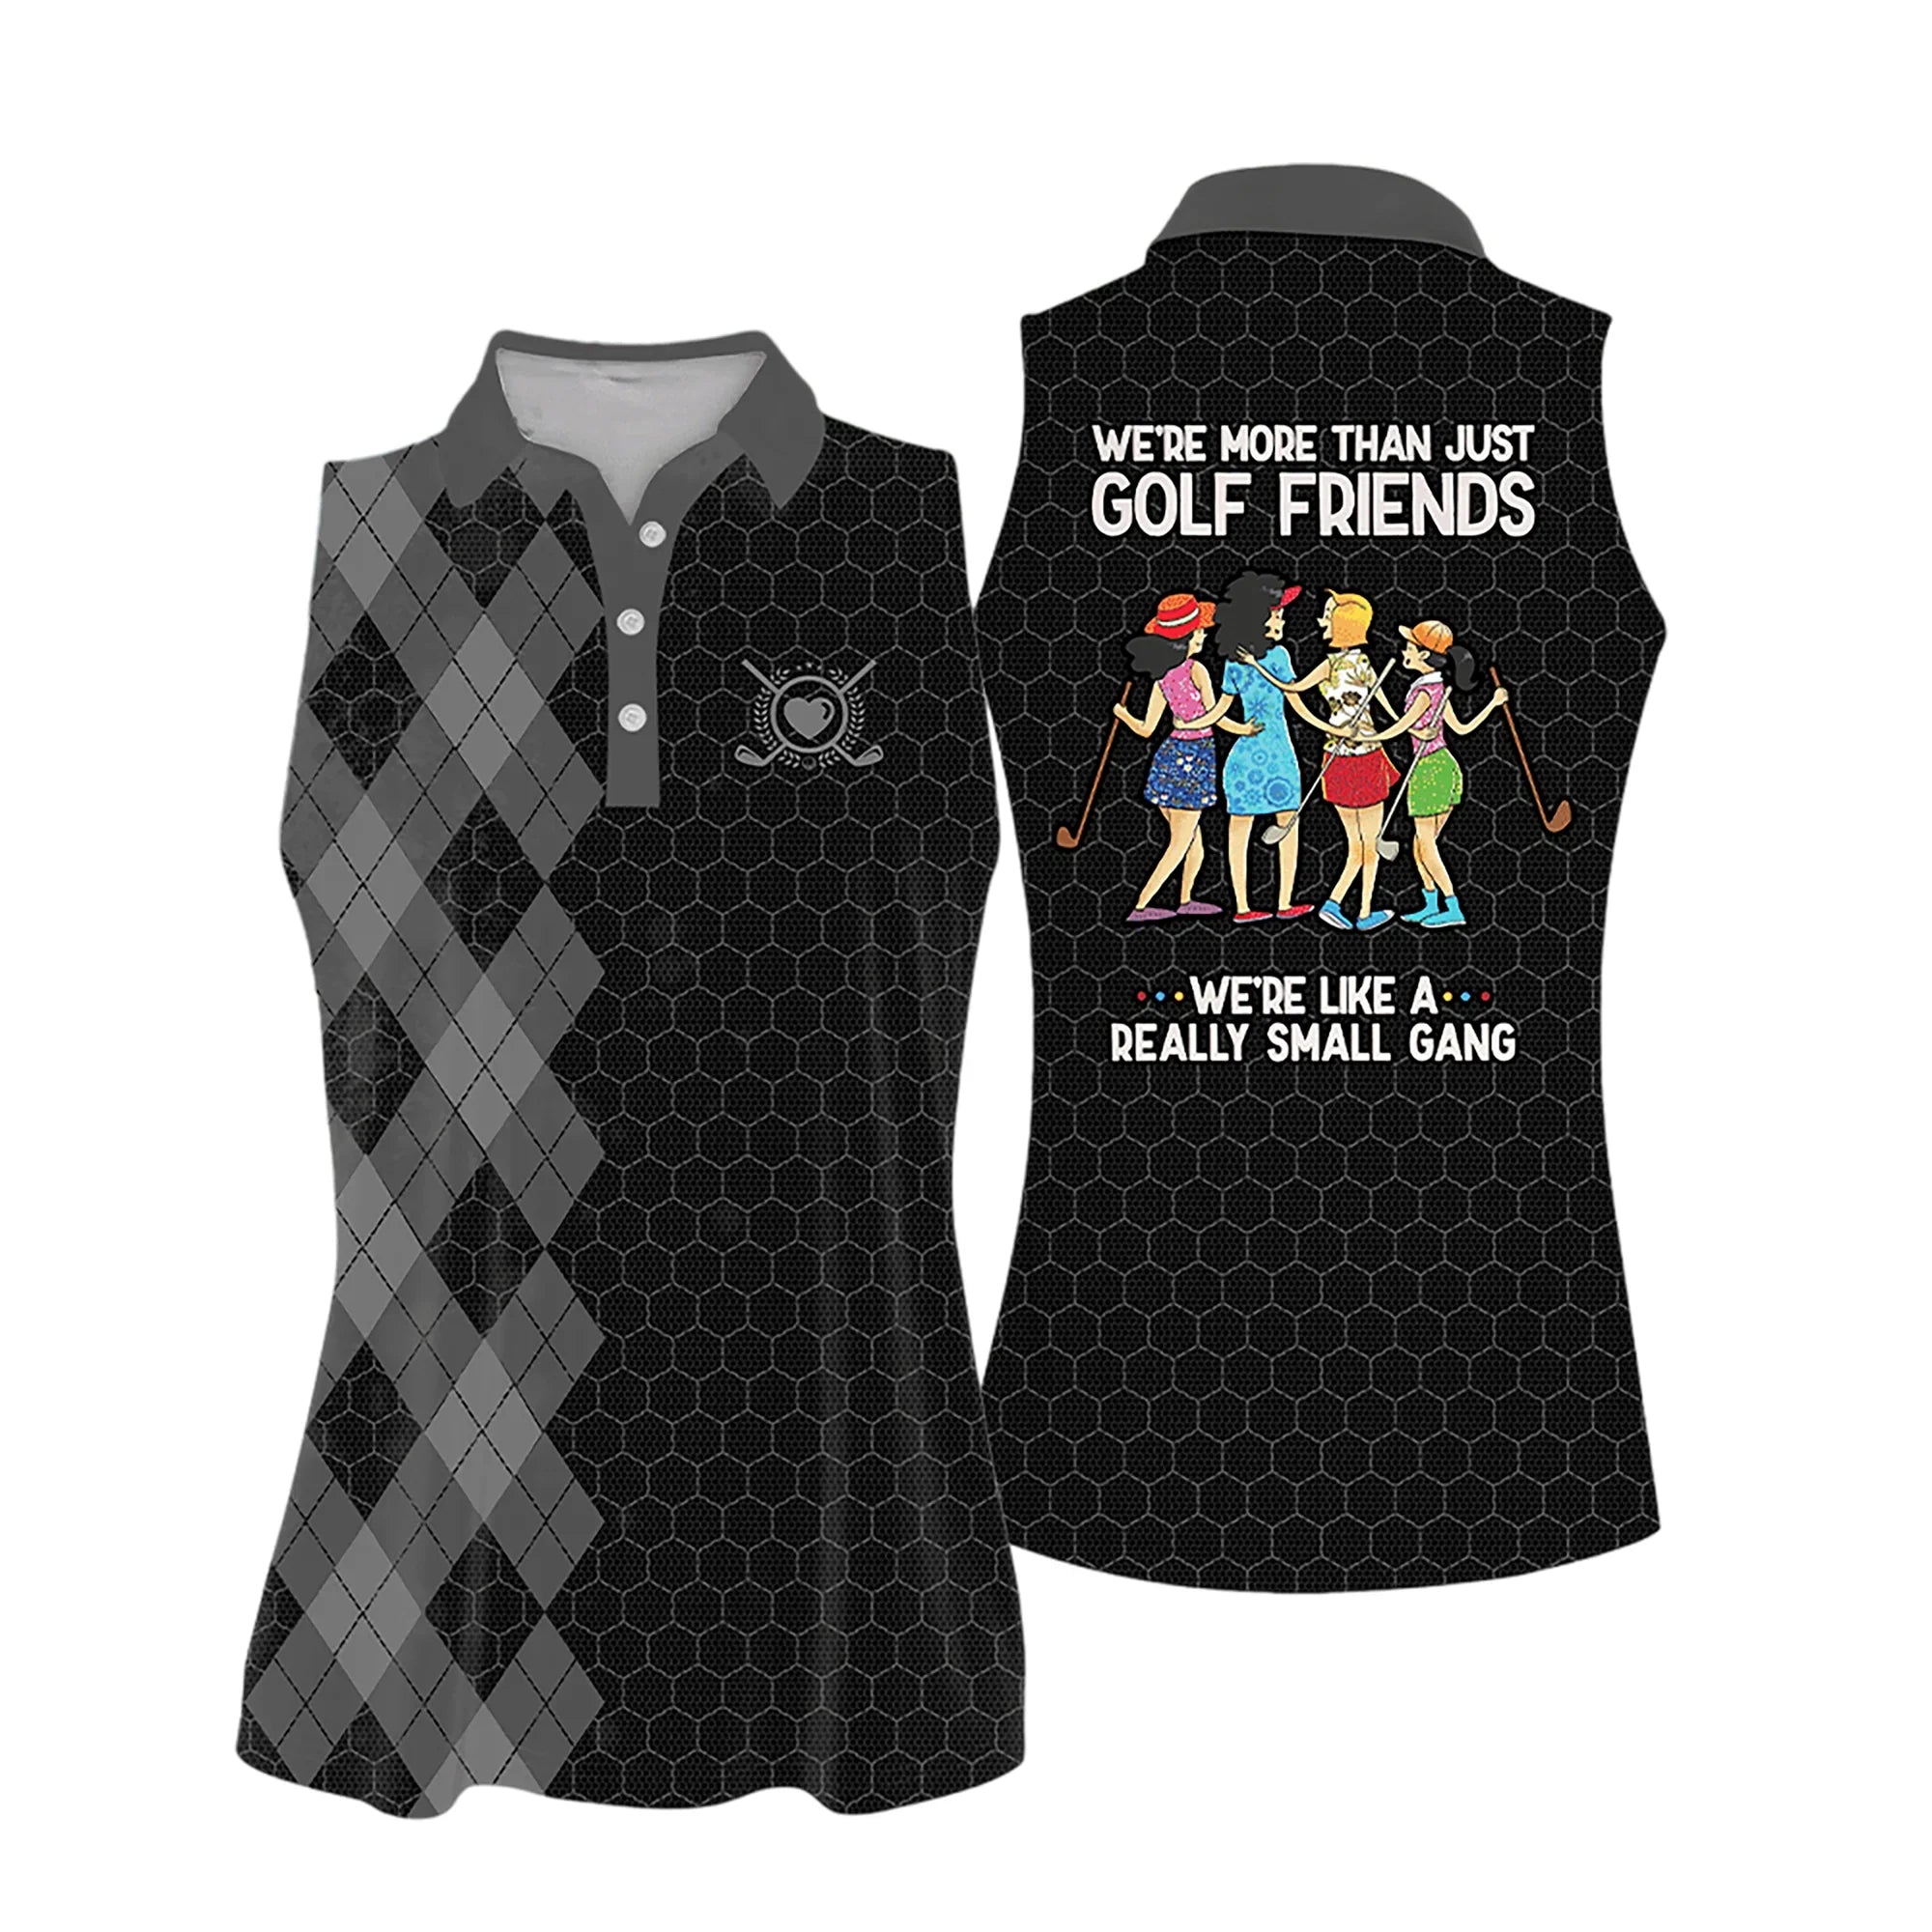 Polo Shirt For Golf Women We''re More Than Just Golf Friends/ We''re Like A Really Small Gang Hot